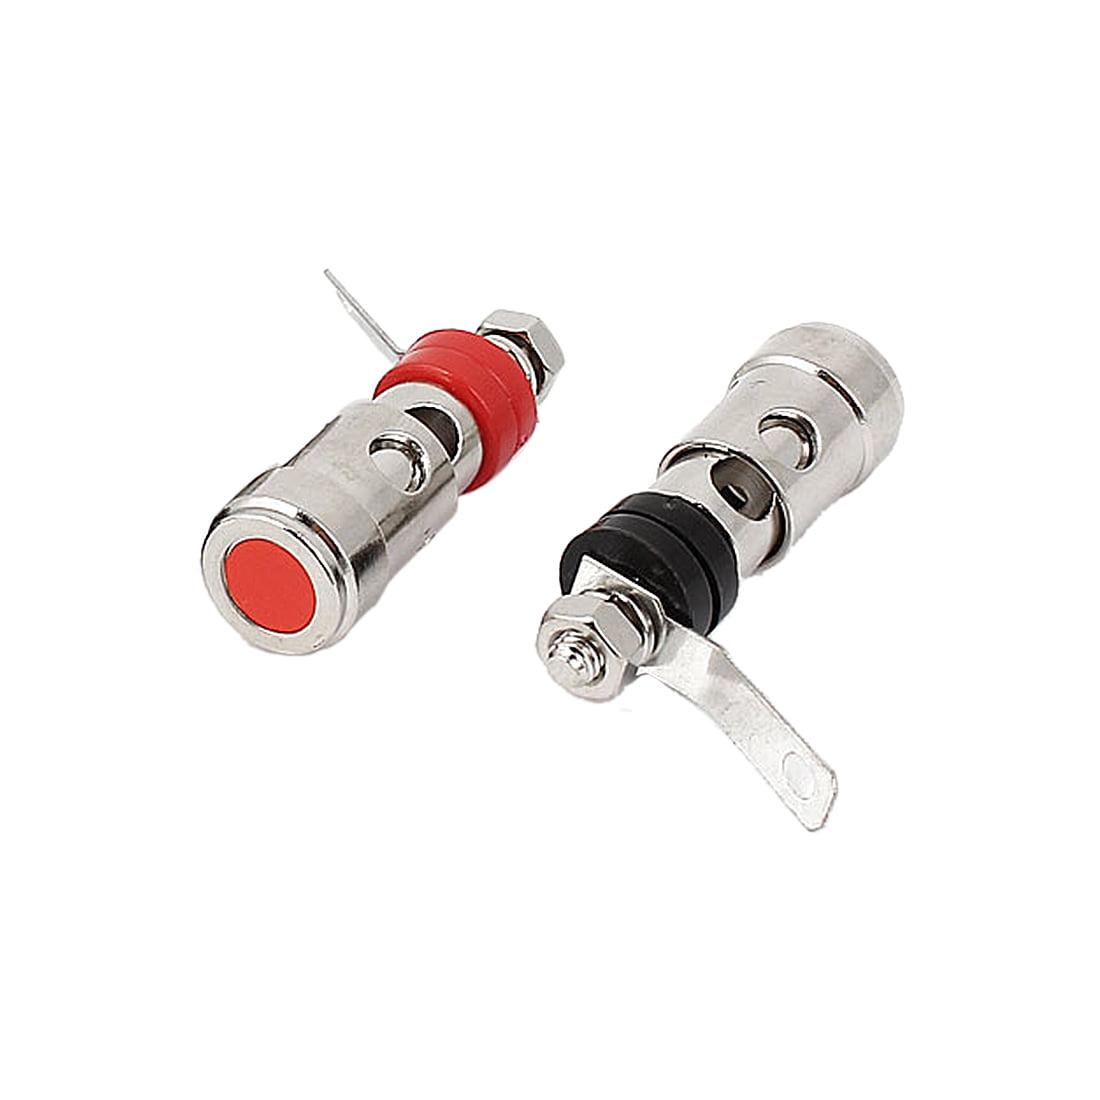 Aexit Silver Plated Audio & Video Accessories Audio Speaker Terminal Self-Locking Binding Connectors & Adapters Post 4Pcs